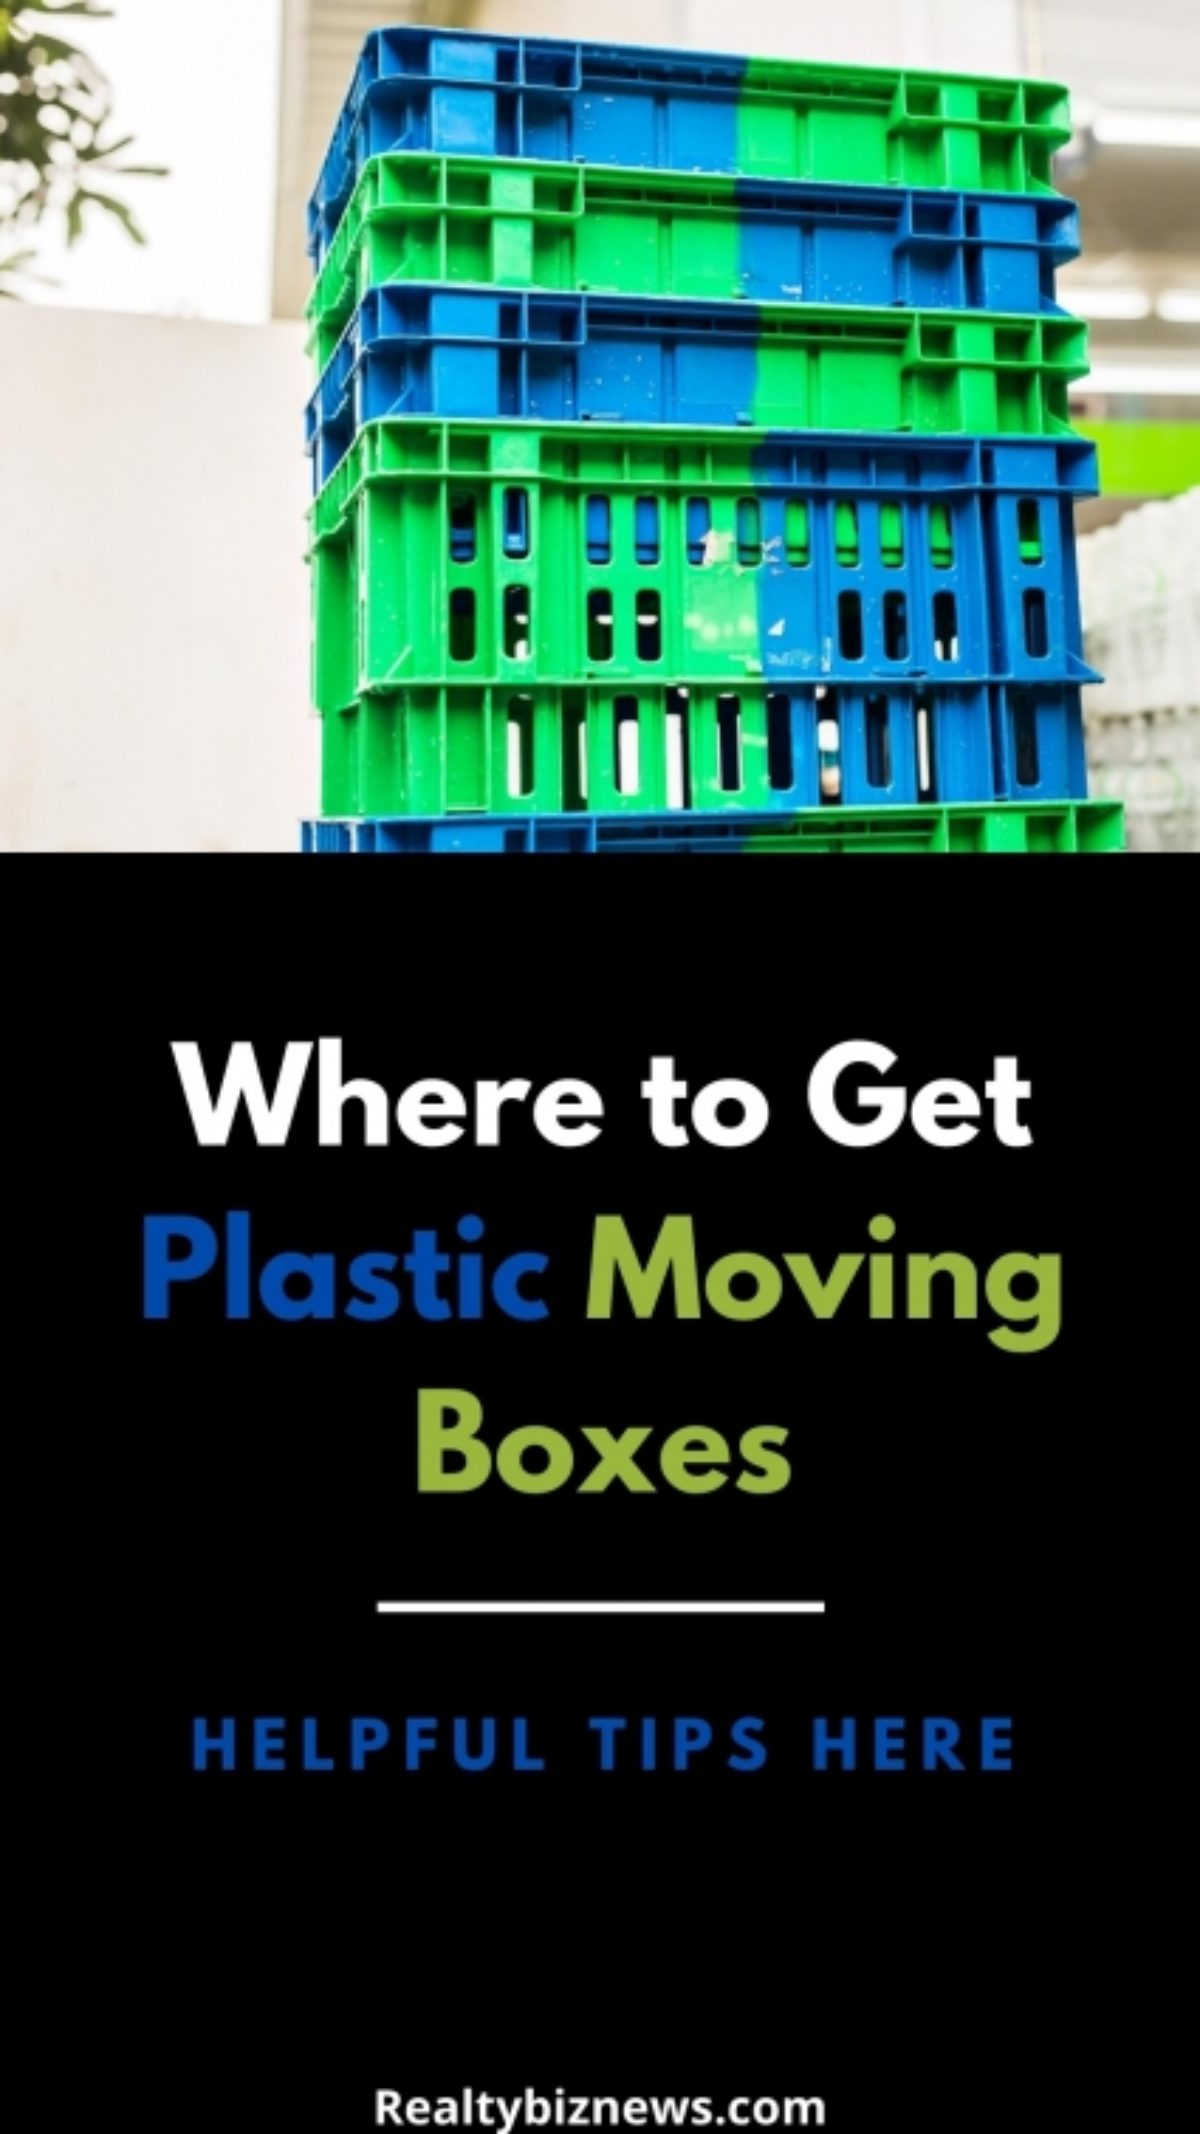 5 Reasons to Rent Plastic Moving Boxes (part of our Miami storage